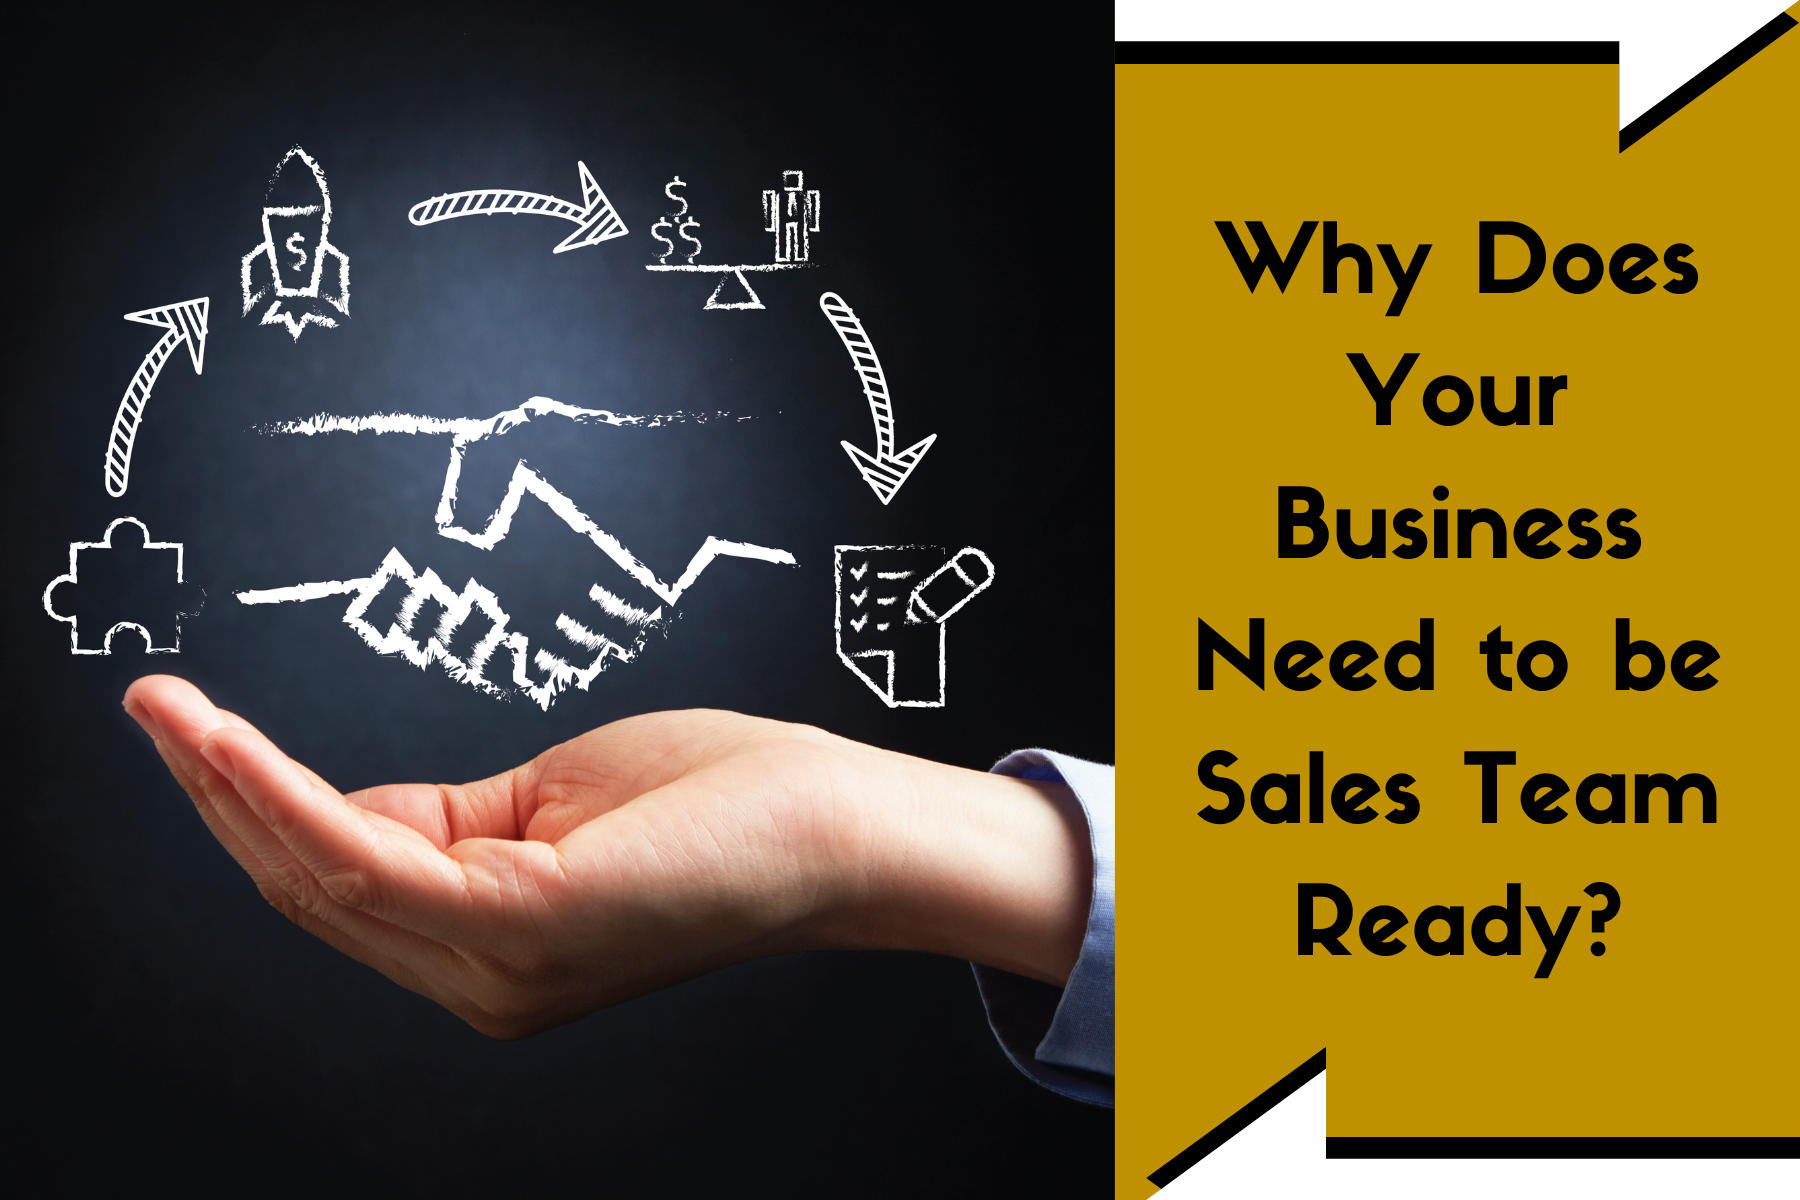 Why Does Your Business Need to be Sales Team Ready?